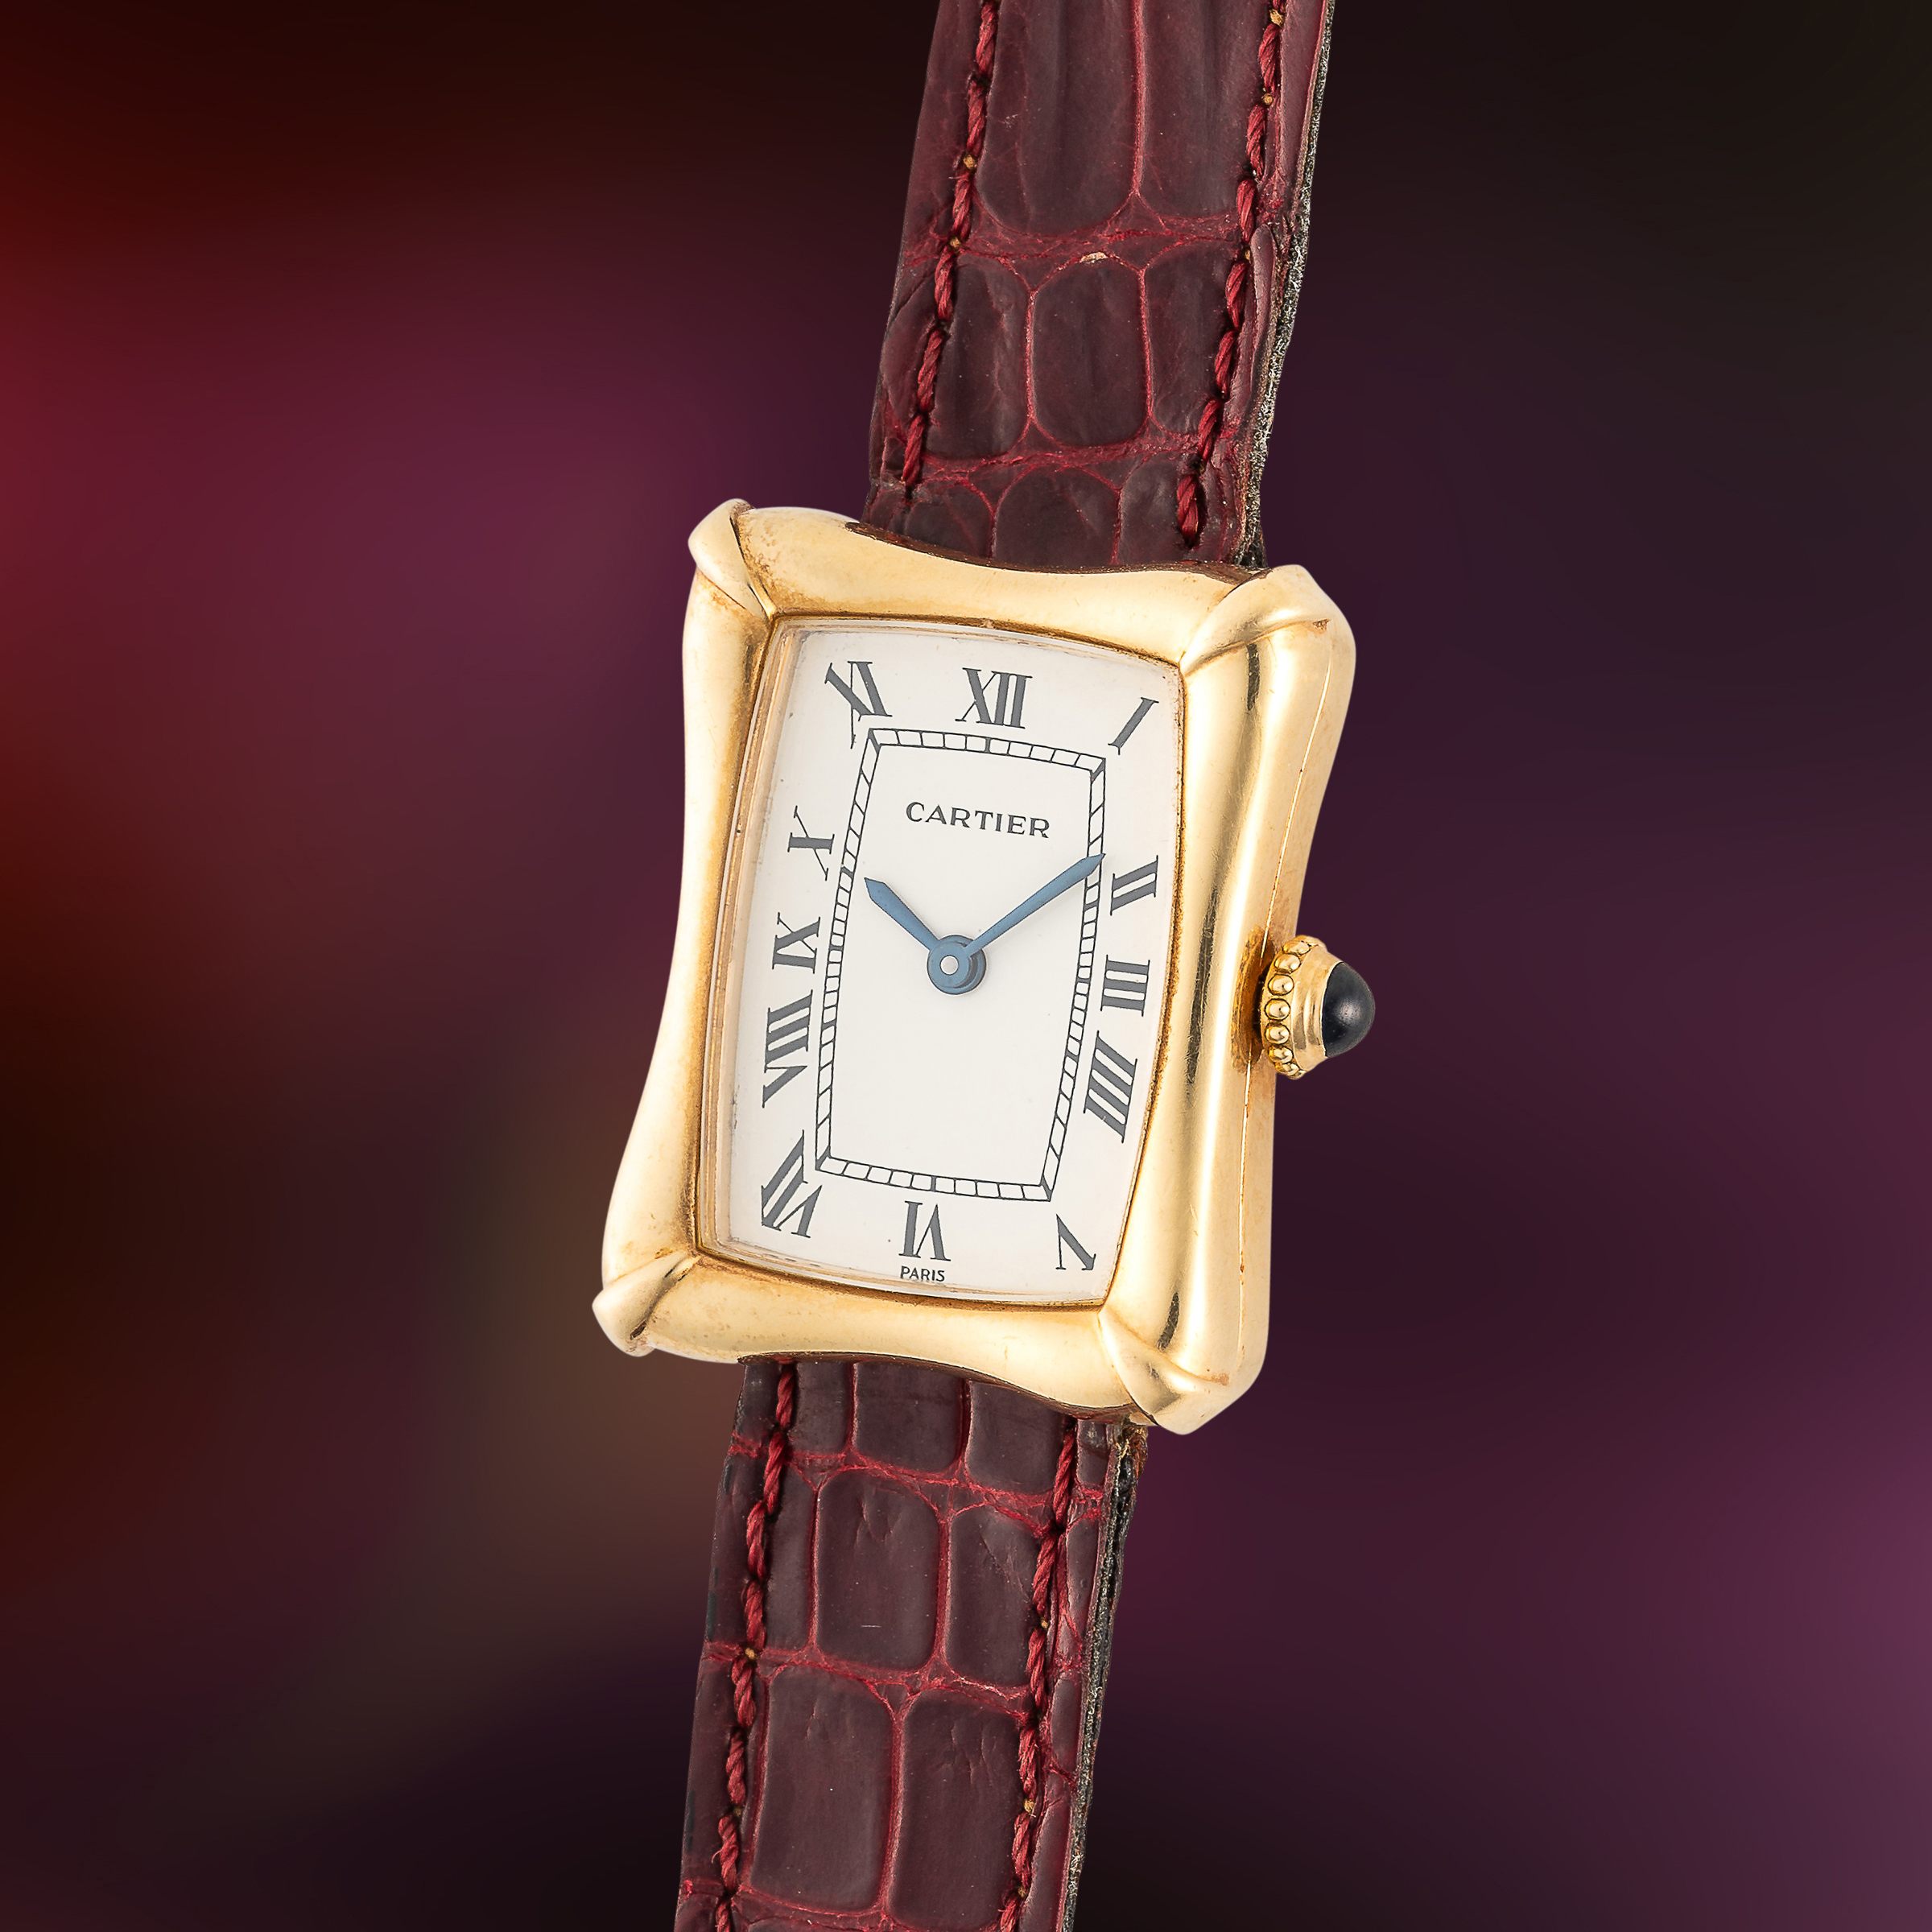 A VERY RARE LADY'S 18K SOLID GOLD CARTIER PARIS BAMBOO COUSSIN WRIST WATCH CIRCA 1970s, REF. 78110